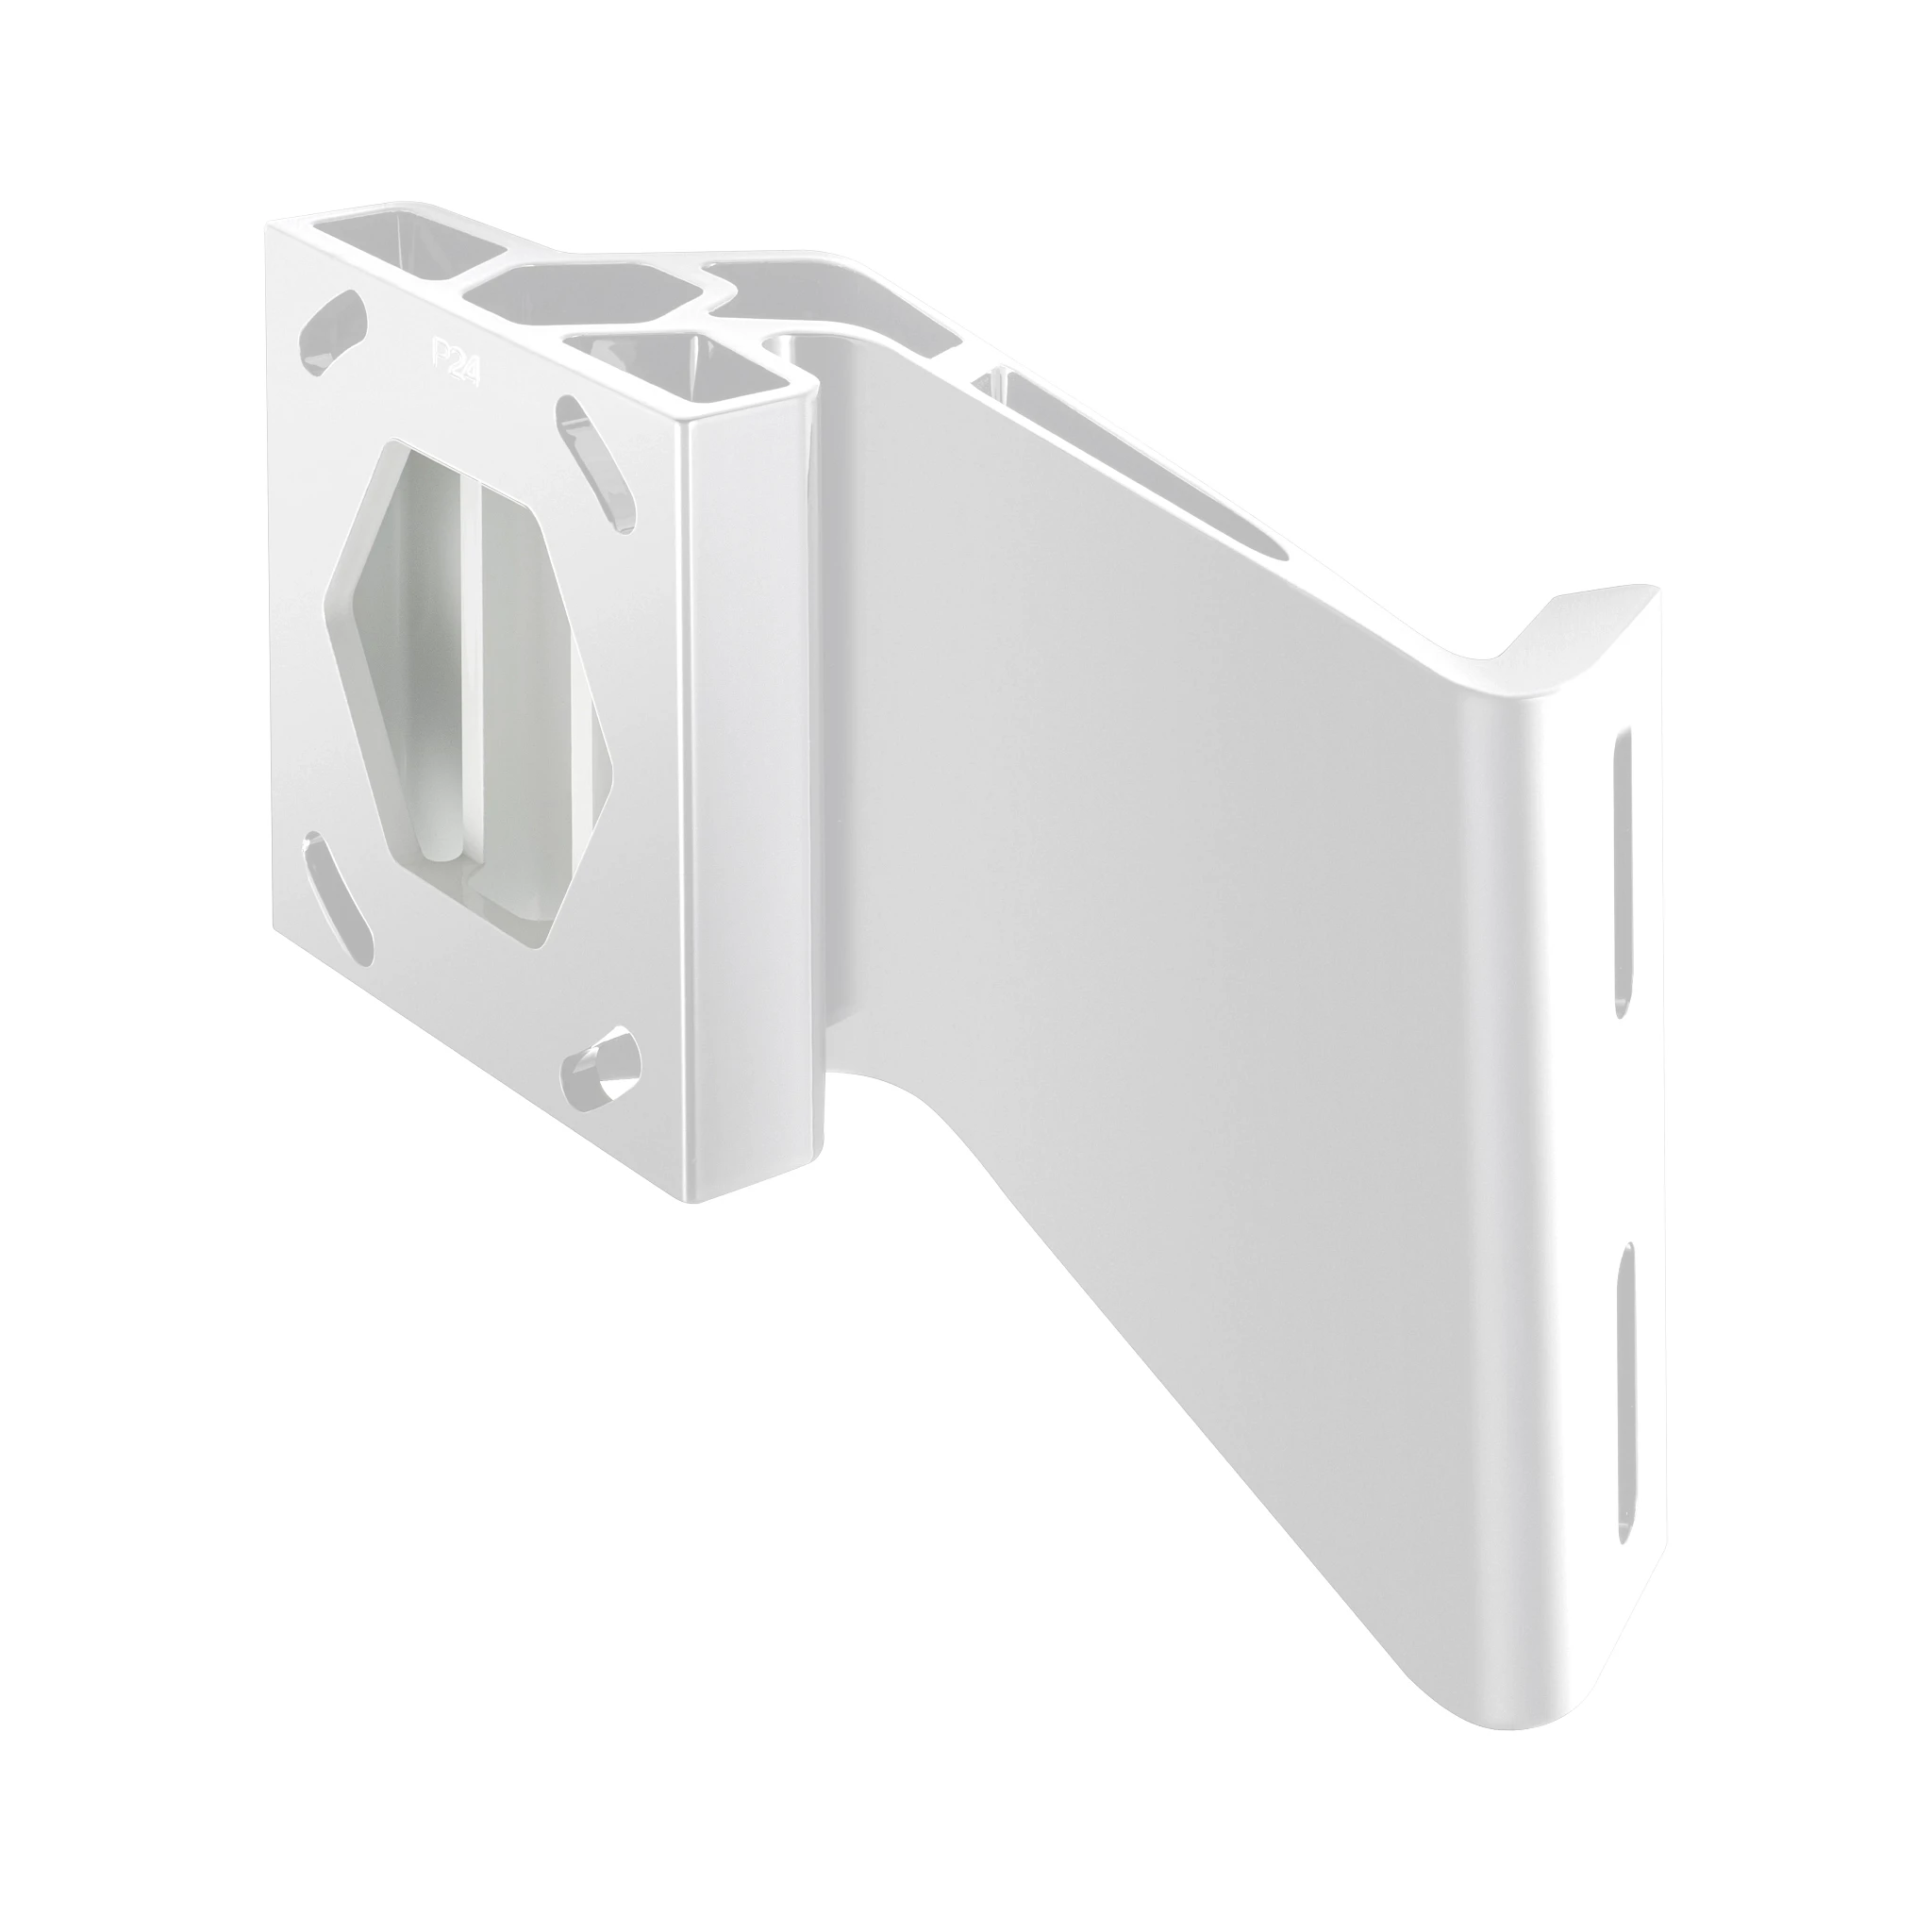 Angled view of white, 4" port jack plate for Raptor shallow water anchor